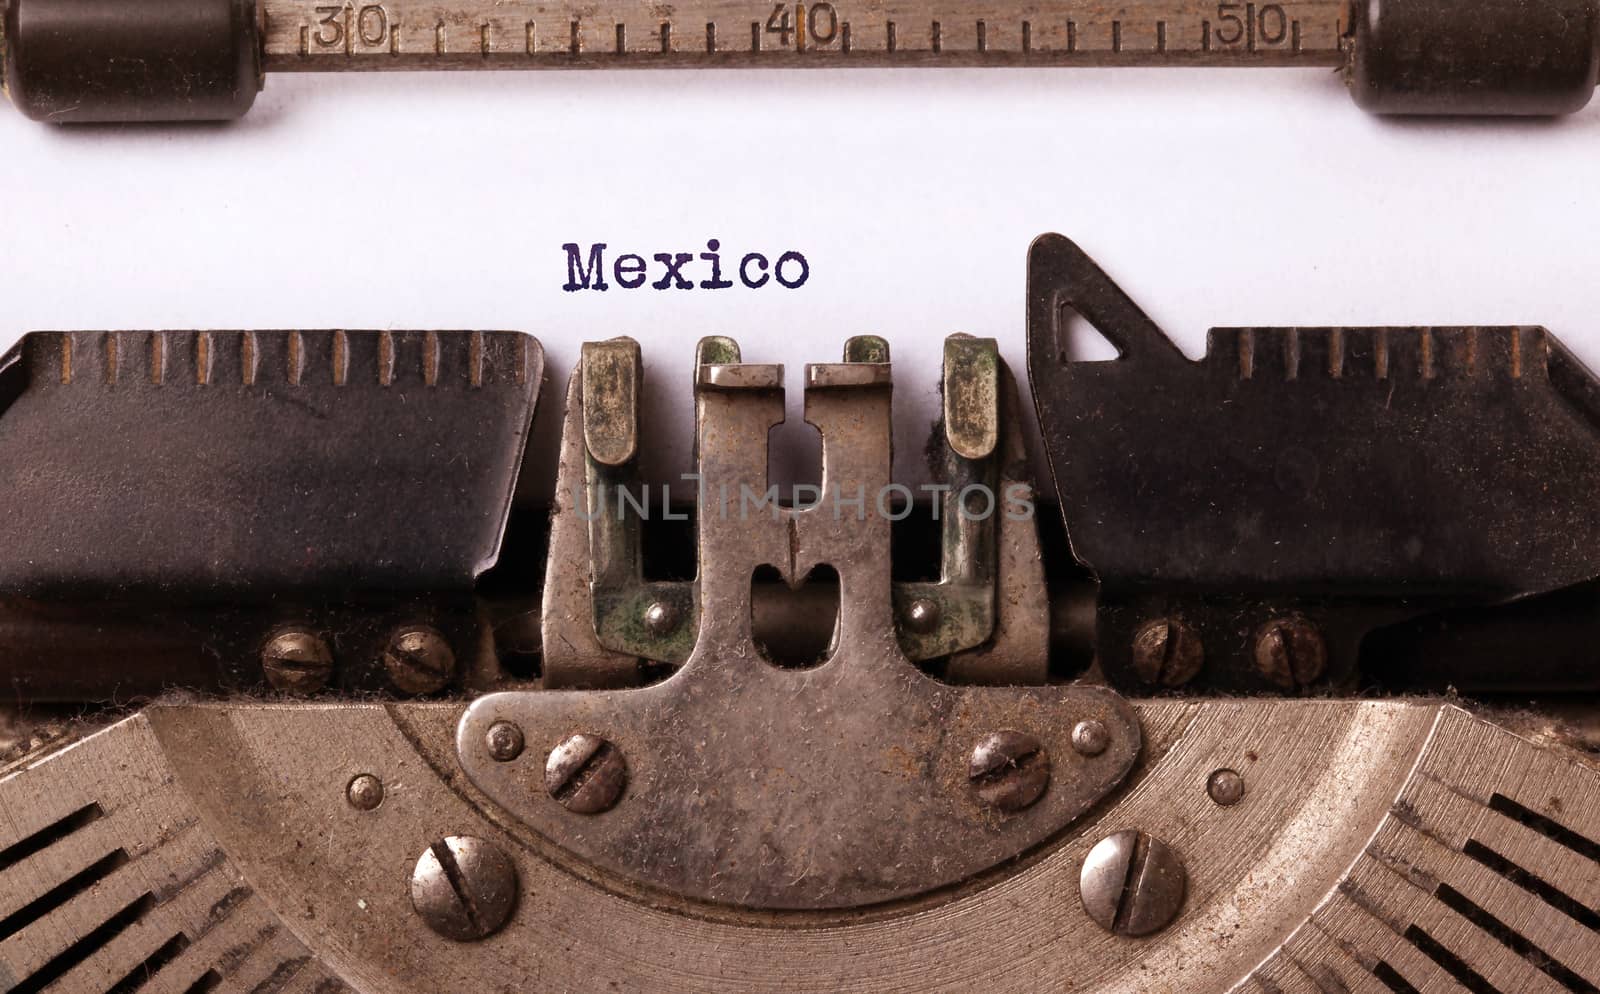 Inscription made by vintage typewriter, country, Mexico